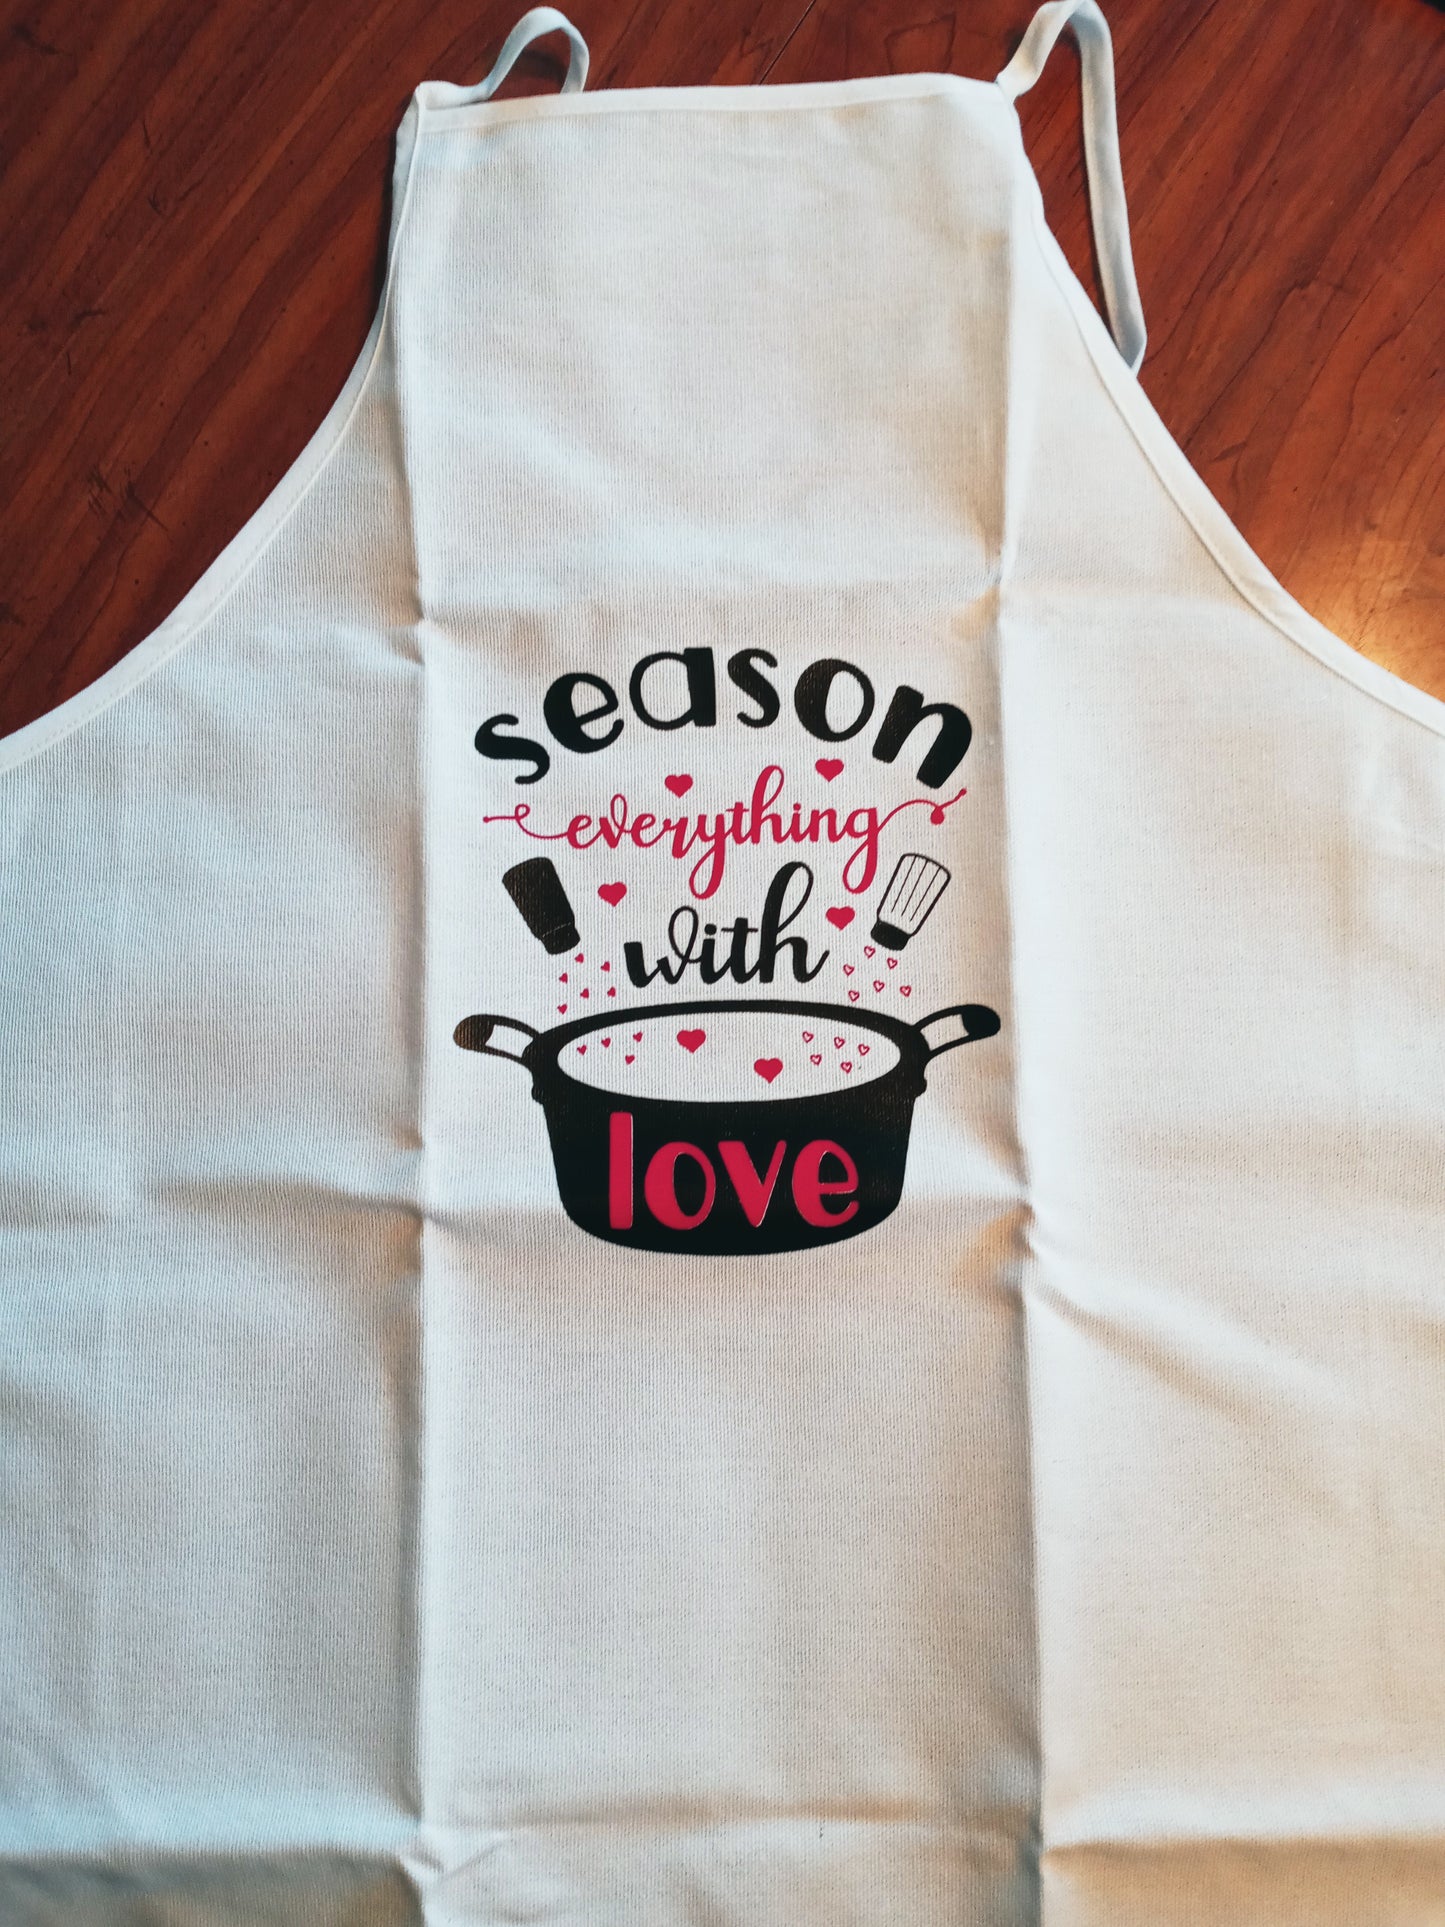 Season Everything with love Apron